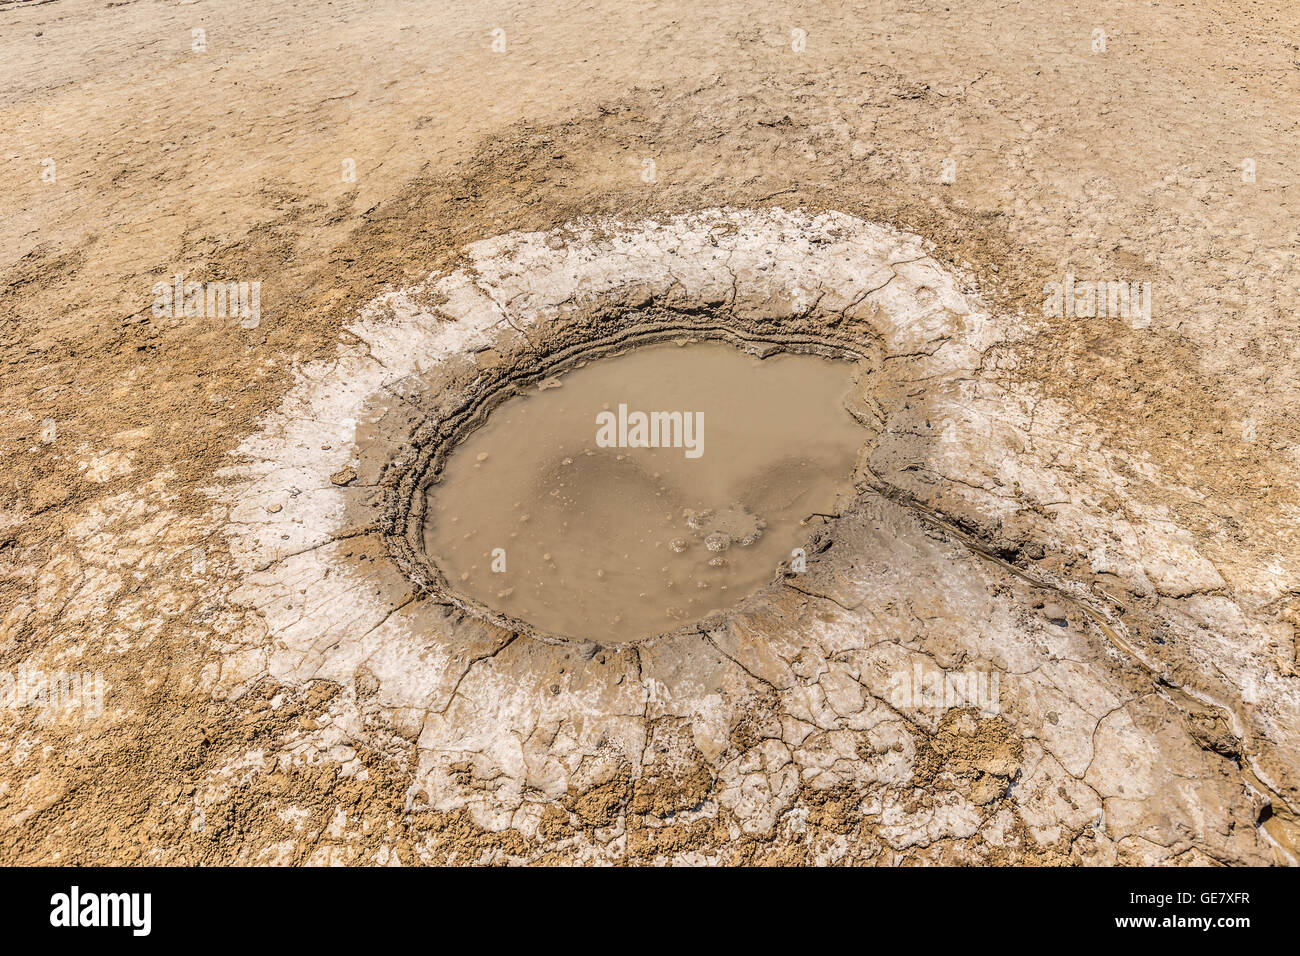 Small crater of a mud volcano Stock Photo